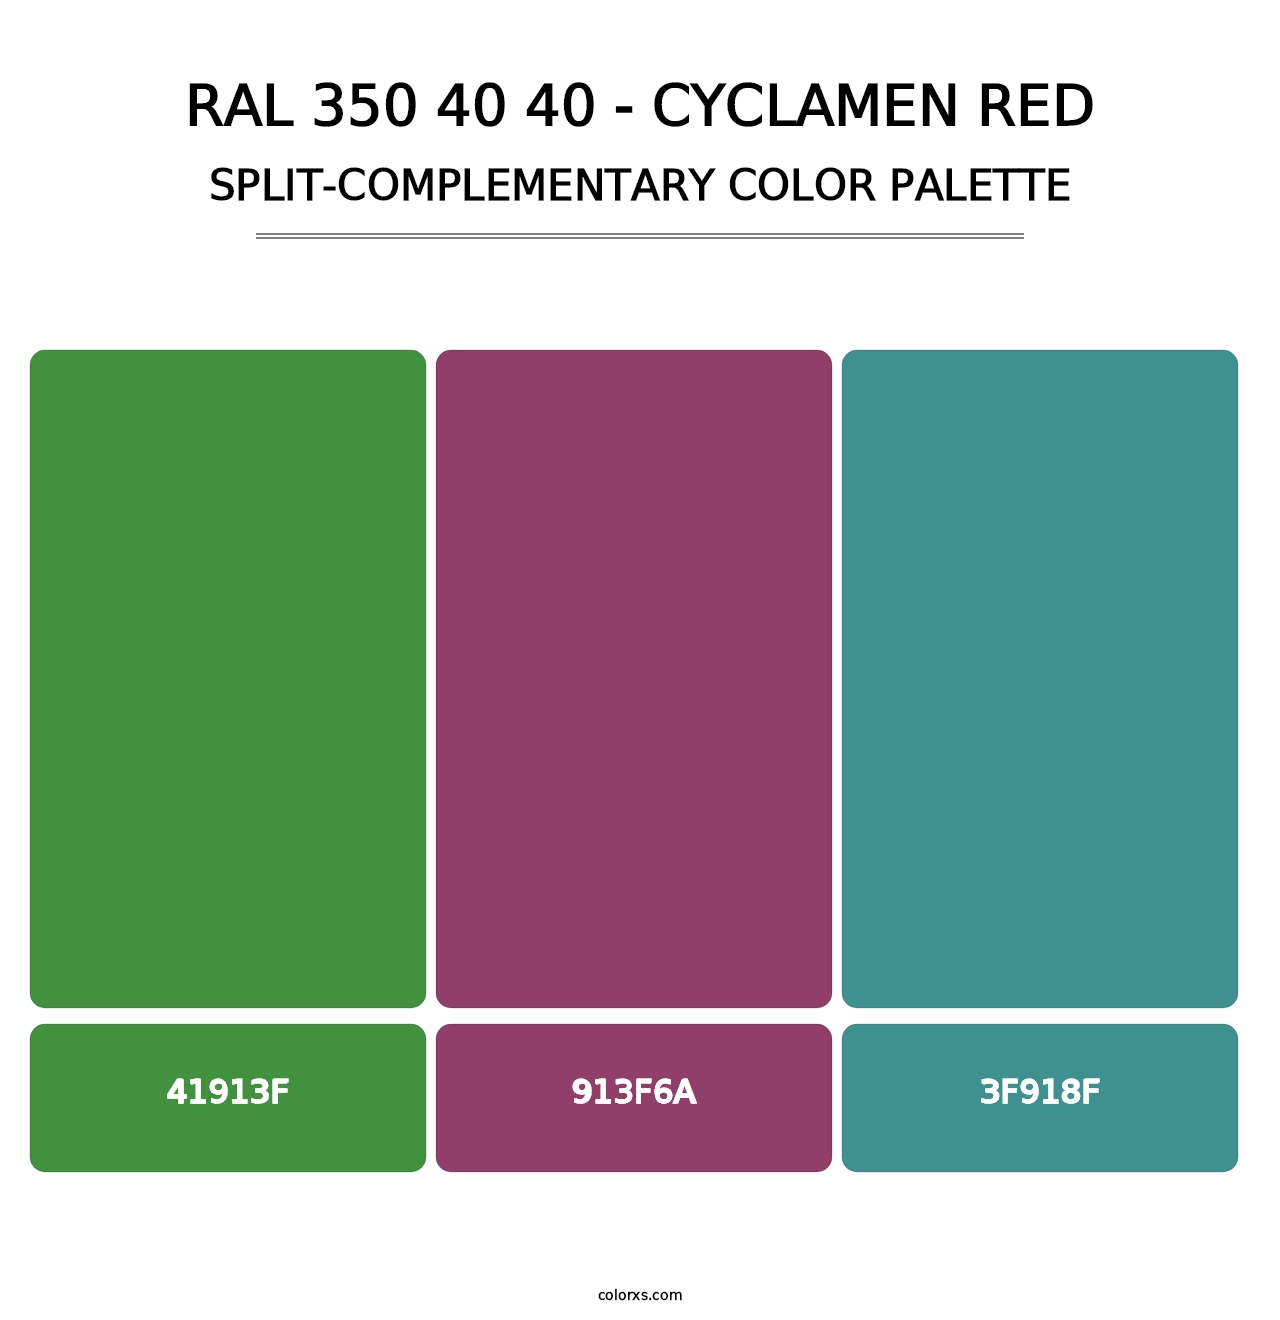 RAL 350 40 40 - Cyclamen Red - Split-Complementary Color Palette